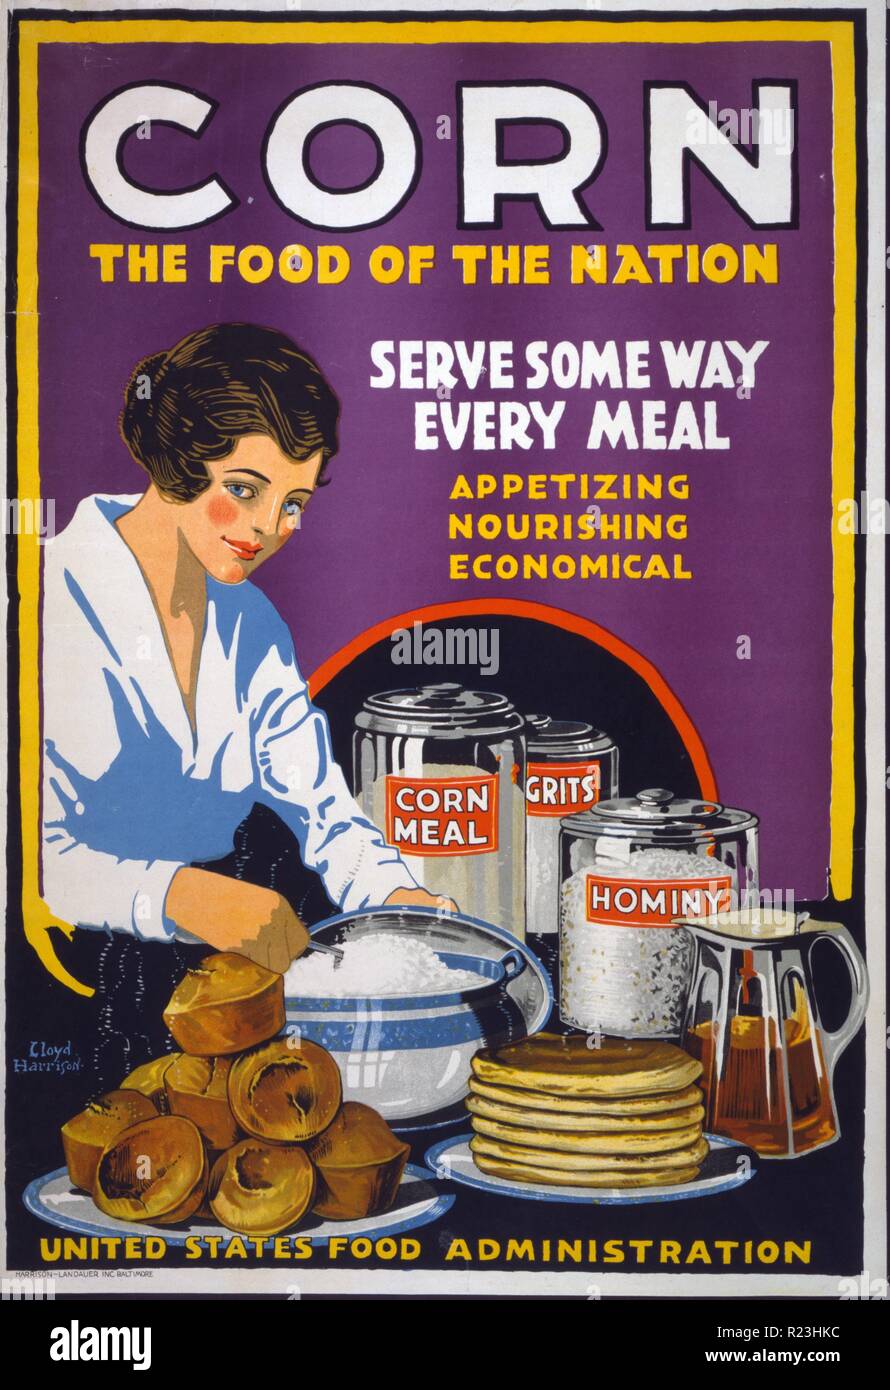 Advertising poster encouraging Americans to eat more corn - the food of the nation, Serve some way every meal - appetizing, nourishing, economical. Poster showing a woman serving muffins, pancakes, and grits, with canisters on the table labelled corn meal, grits, and hominy. 1940s Stock Photo